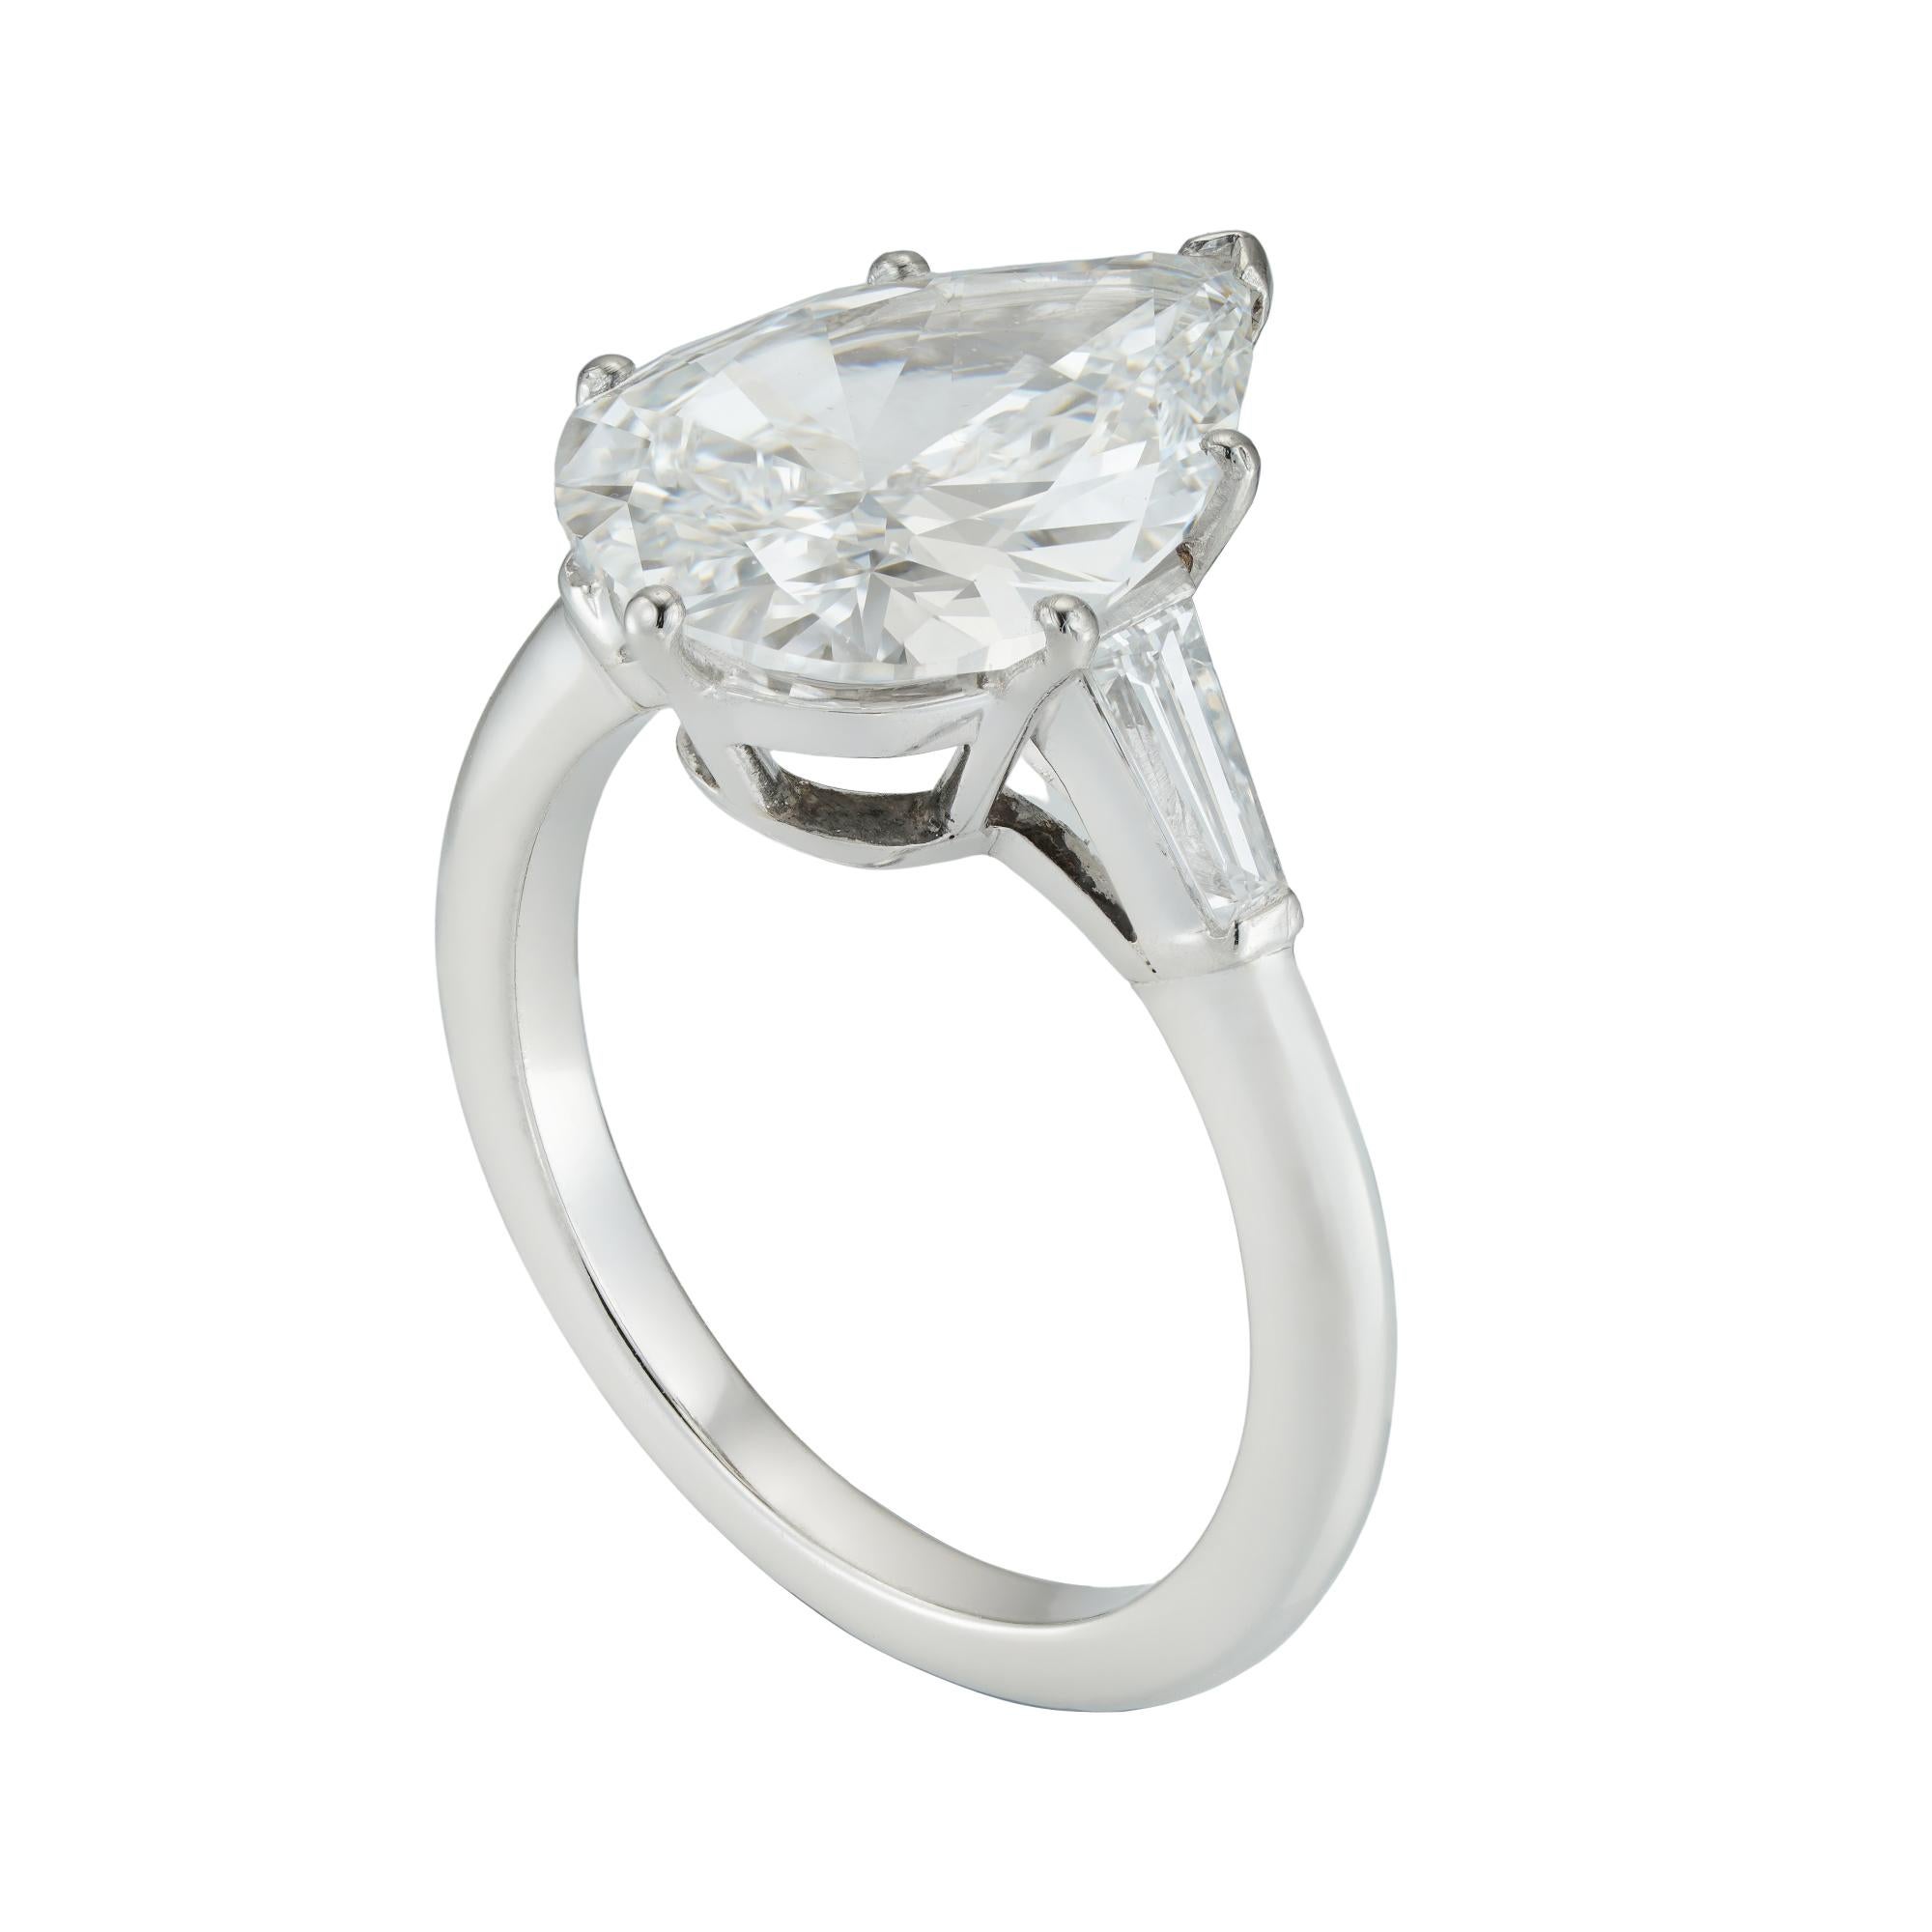 A pear-shape solitaire diamond ring, the pear-shaped diamond weighing 4.01 carats accompanied by GIA report stating to be of E colour and VS1 clarity, six claw-set between two small taper baguette-cut diamonds estimated to weigh a further total of